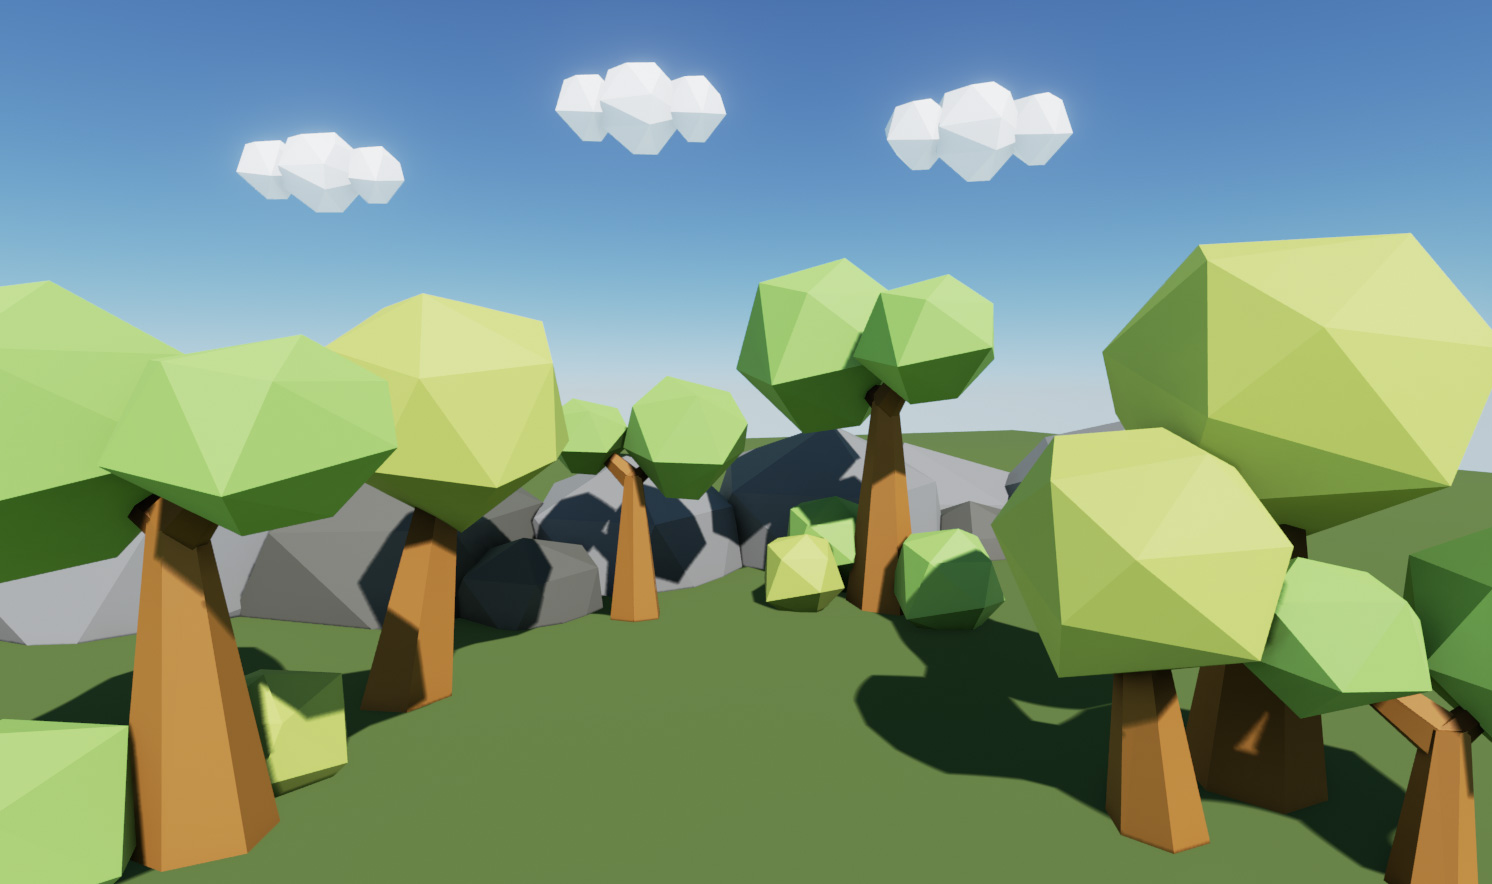 Low Poly Worlds - a good way to learn Blender and UE4